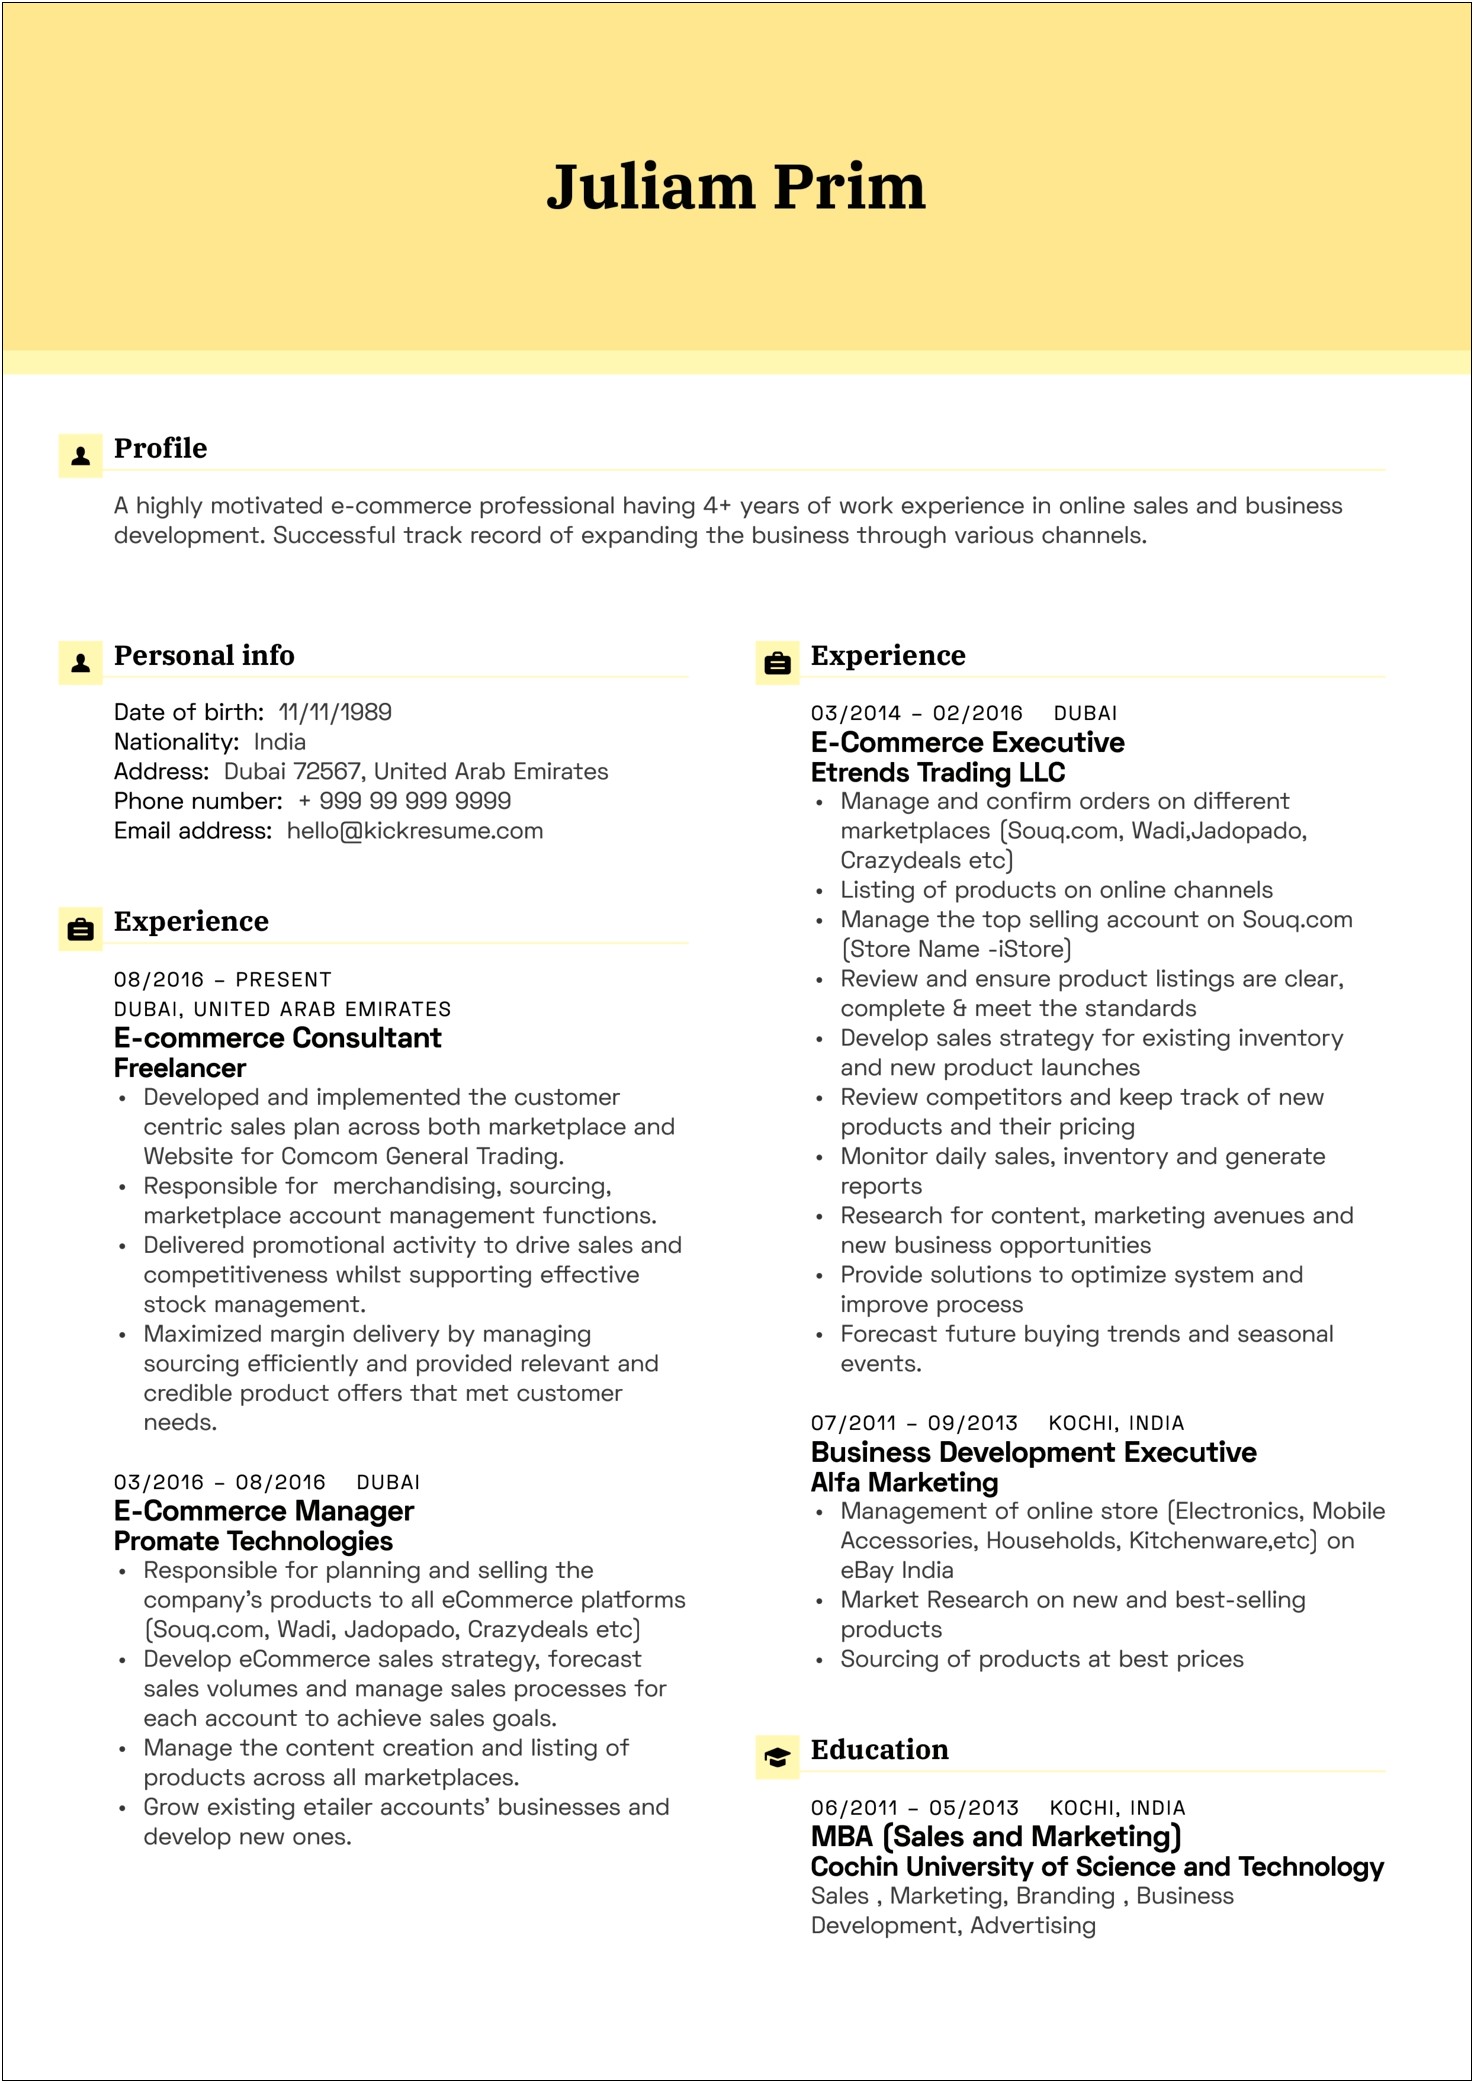 Resume Noting Dealing With Executive Management